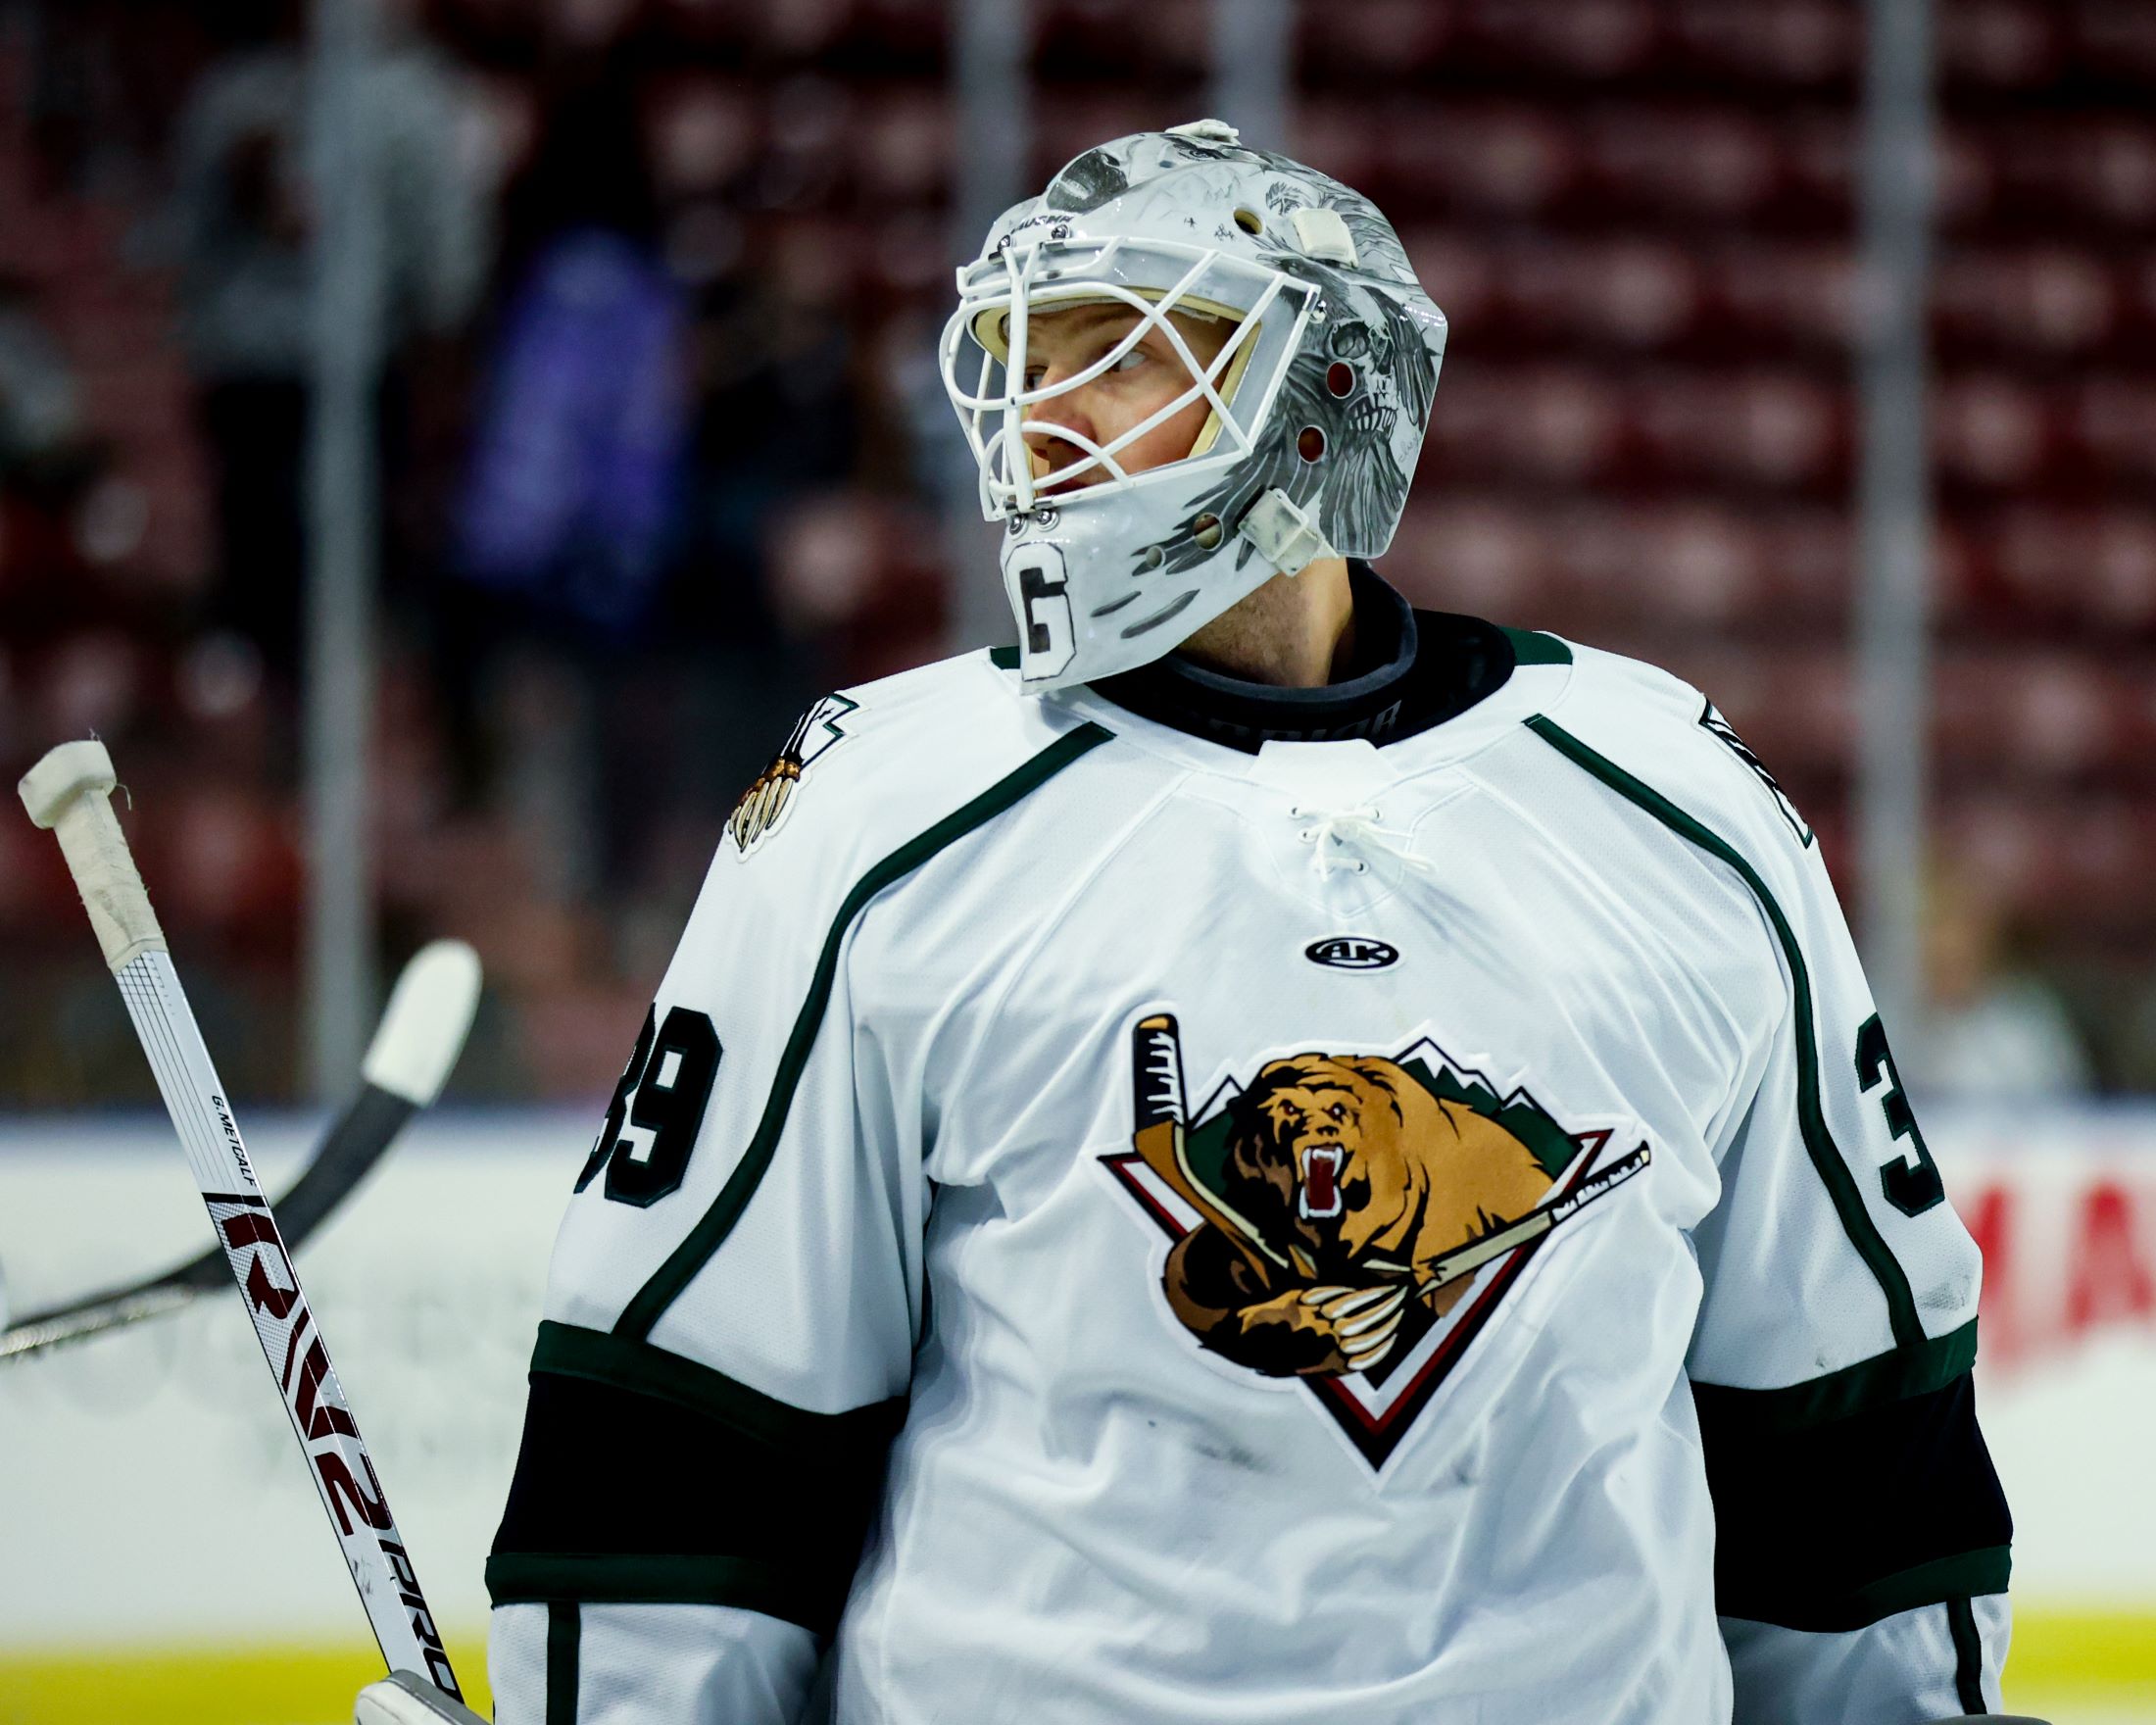 Local hockey player returns home to the Utah Grizzlies